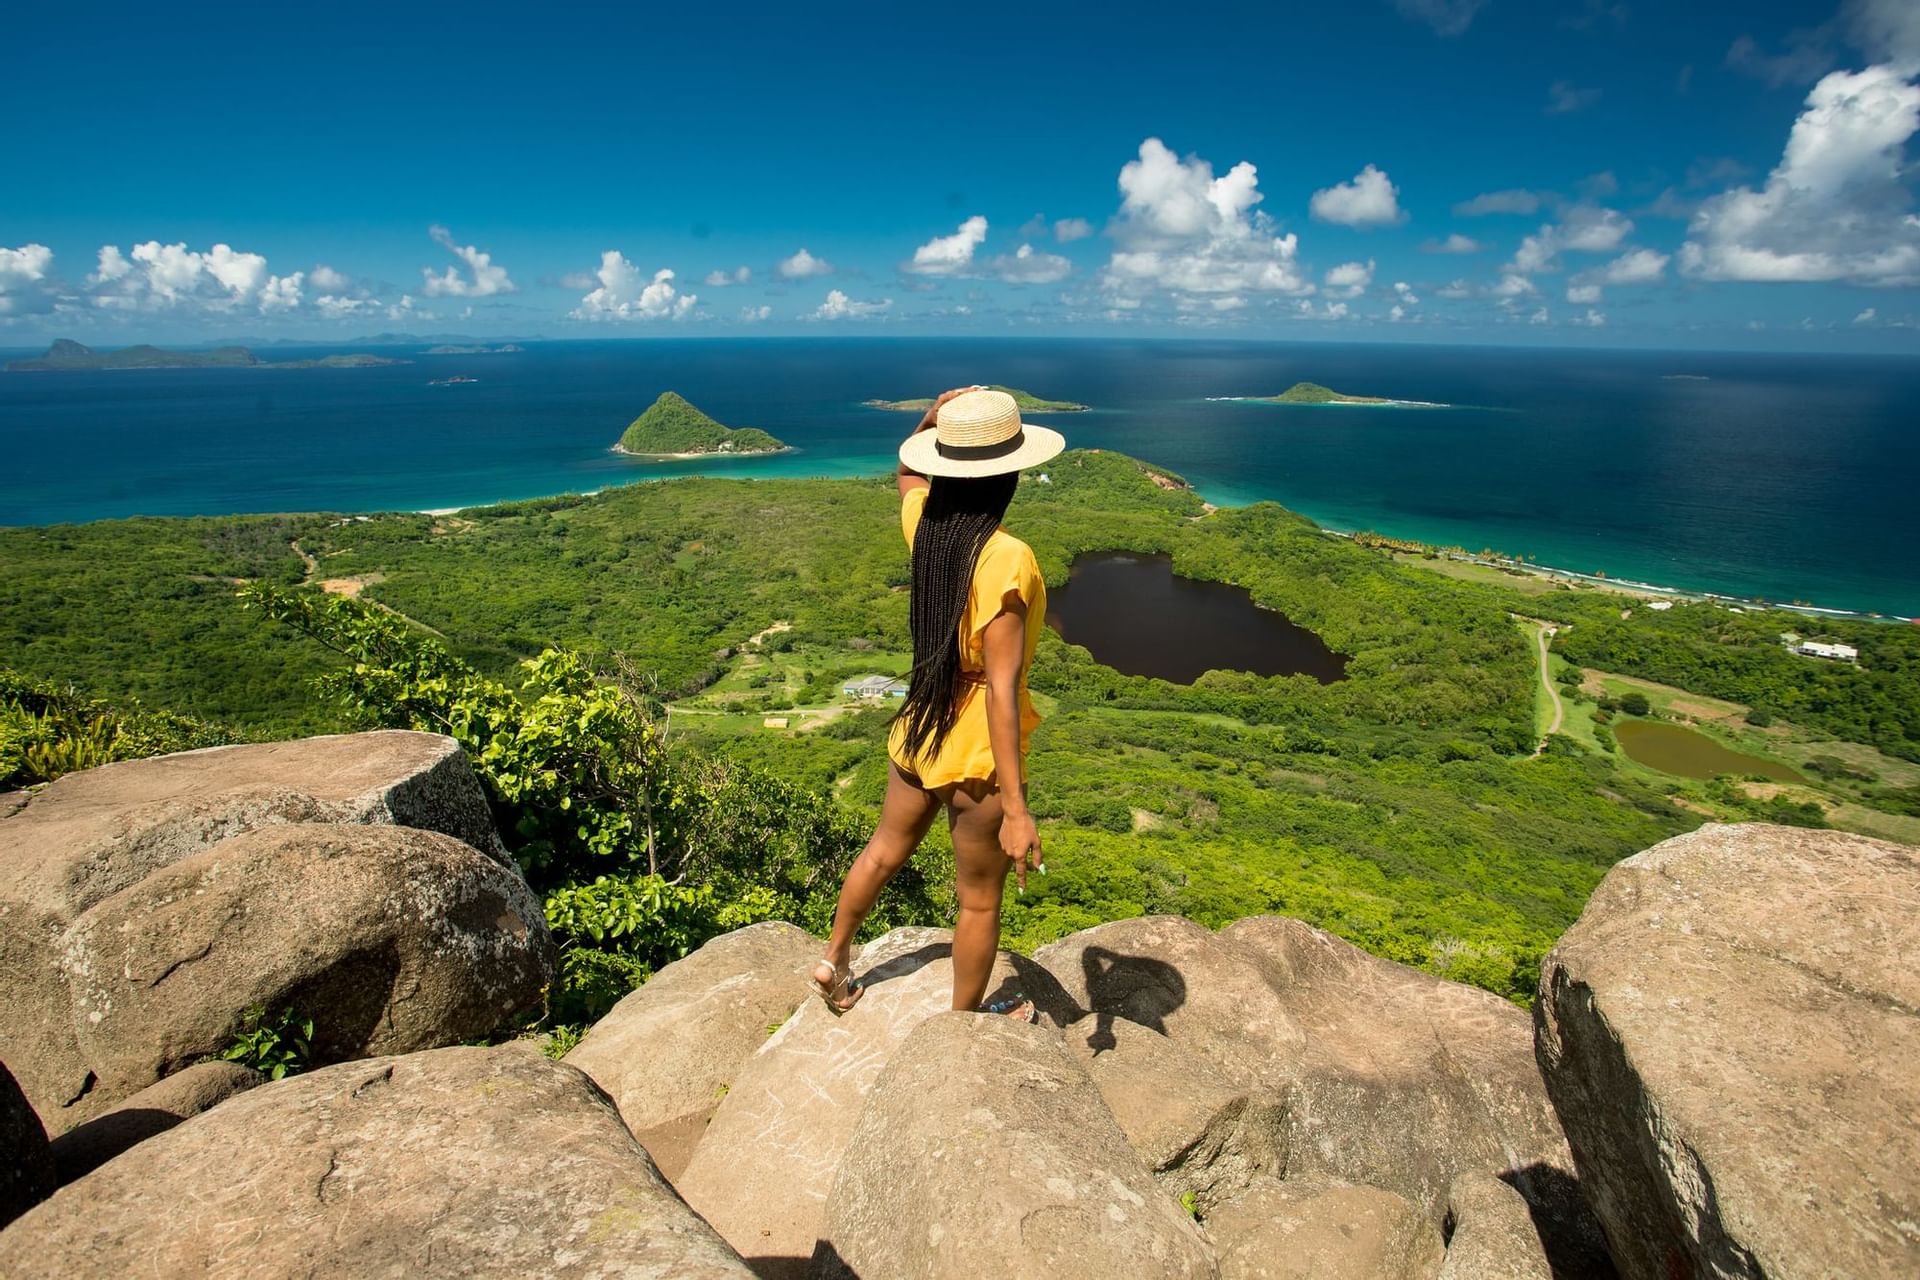 Woman with a hat standing on rocks looking out over islands